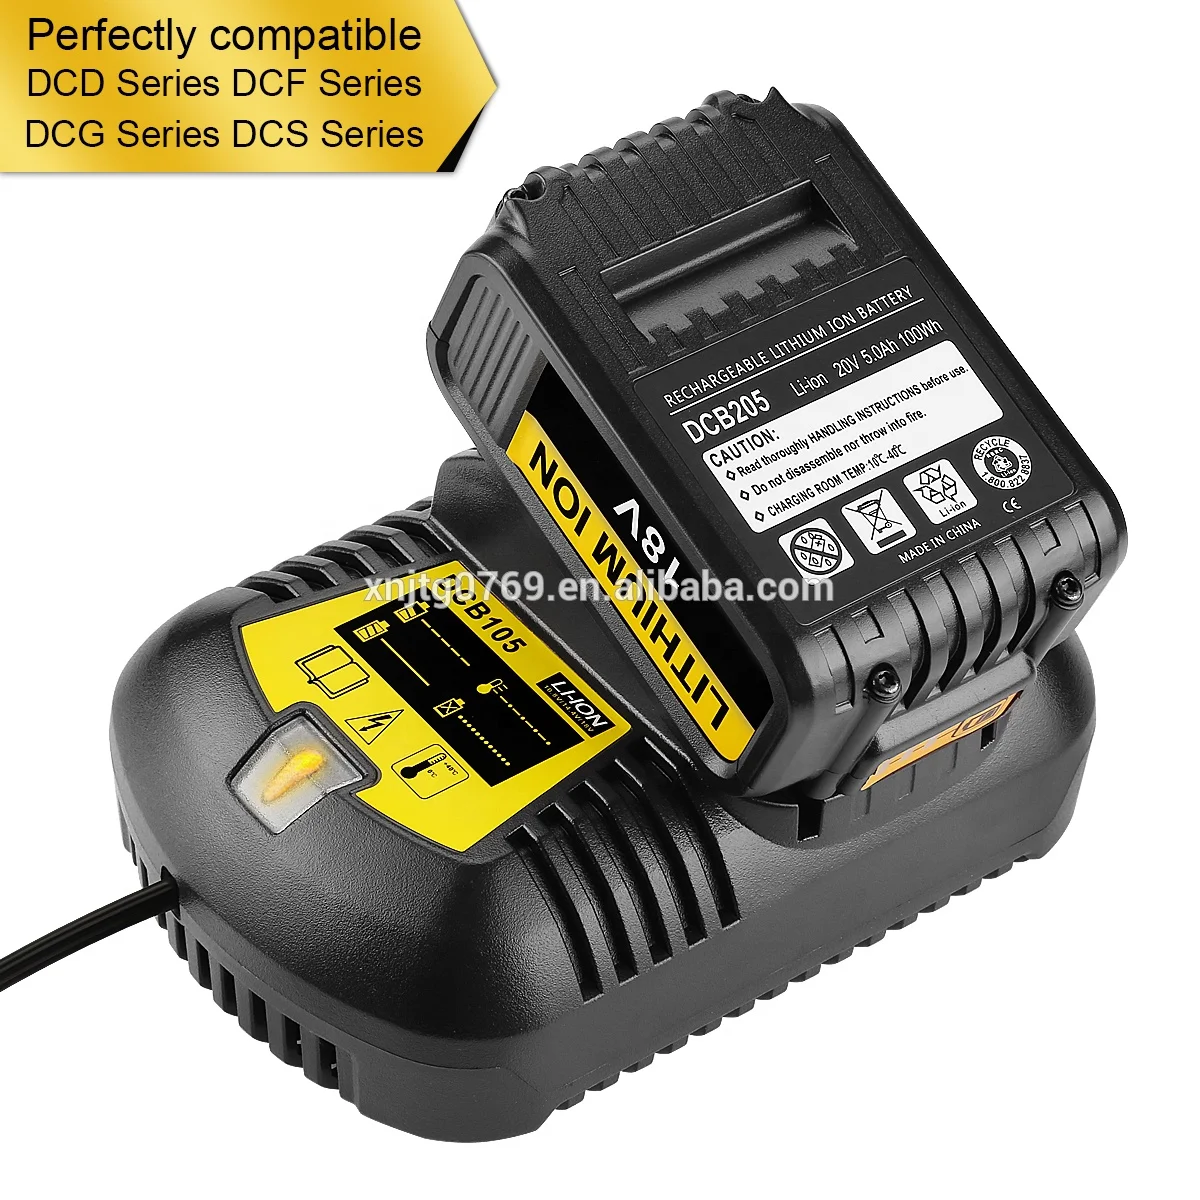 20V Replacement fast charger DCB105 DCB201 DCB204 for 10.8 to 20V cordless power tool battery